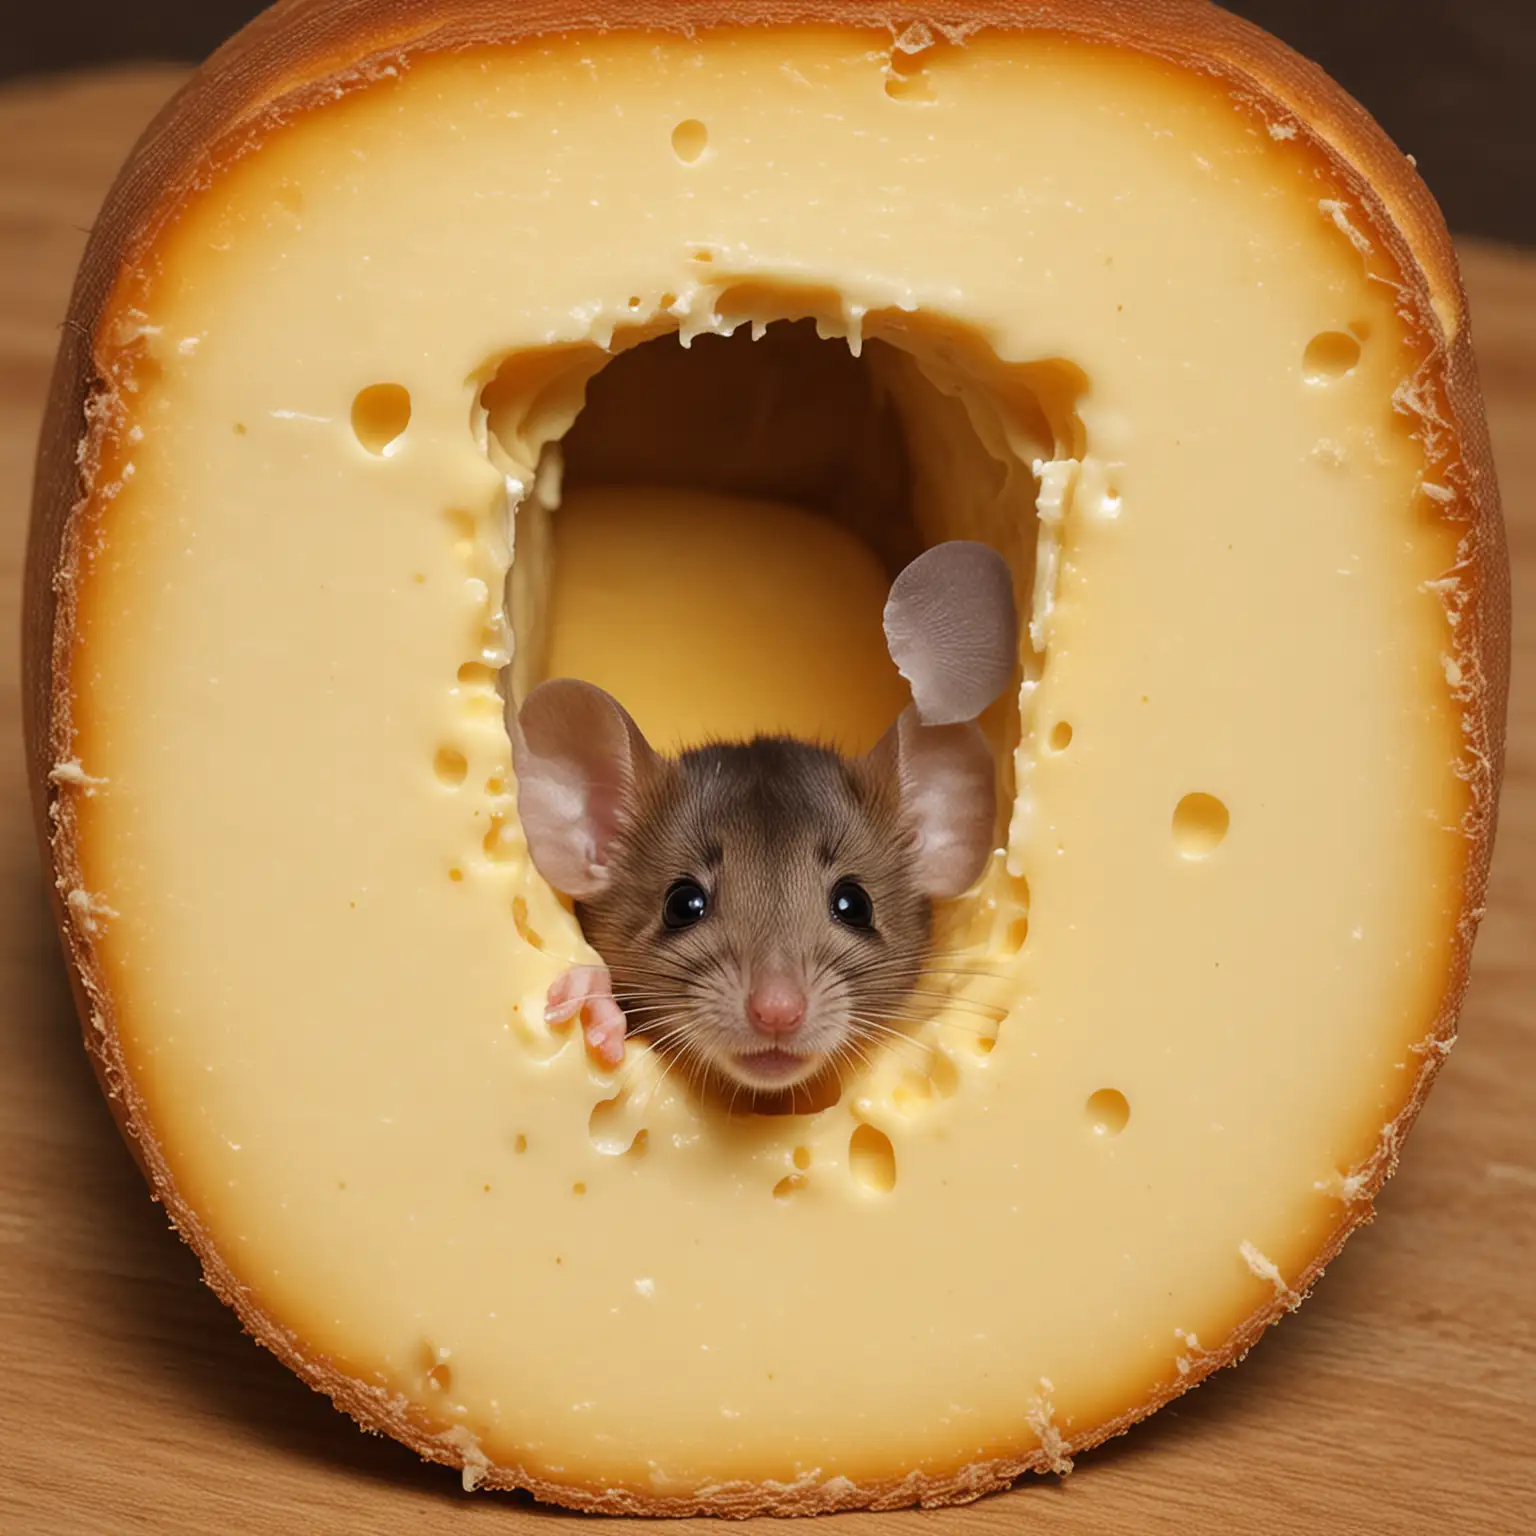 you are a mouse and you are looking at a hole, call it the center of the cheese, but it reminds you of your childhood